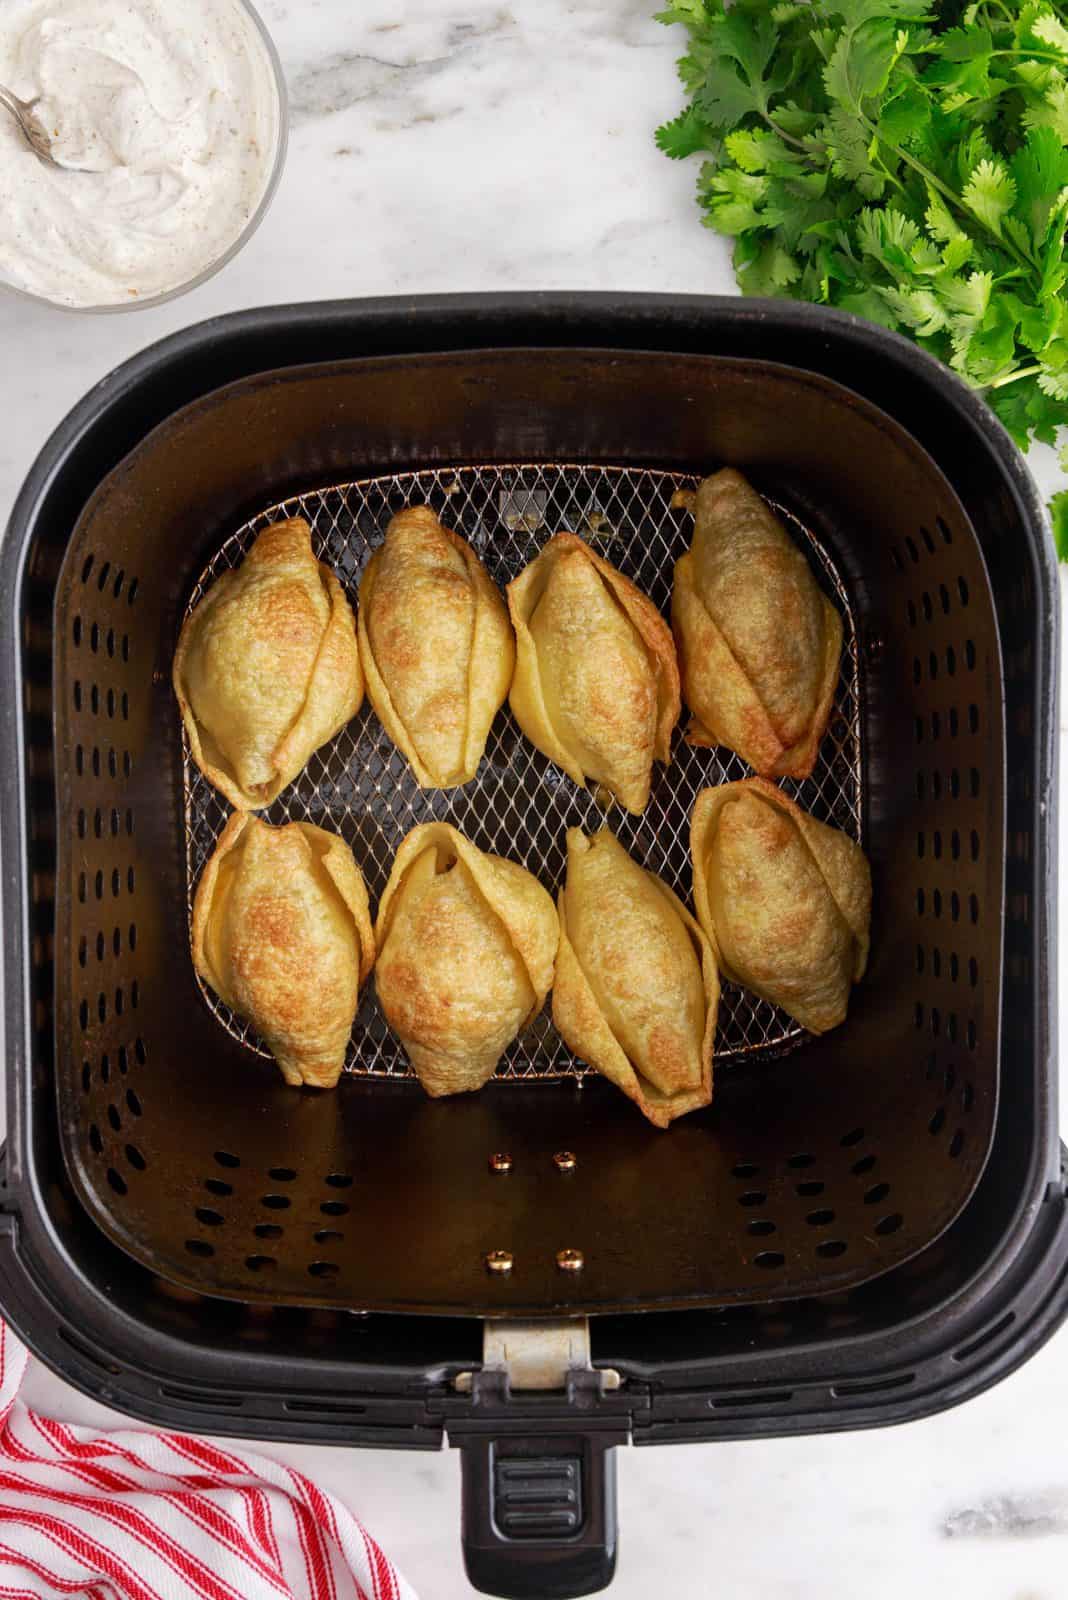 Finished shells in air fryer showing golden brown shells.